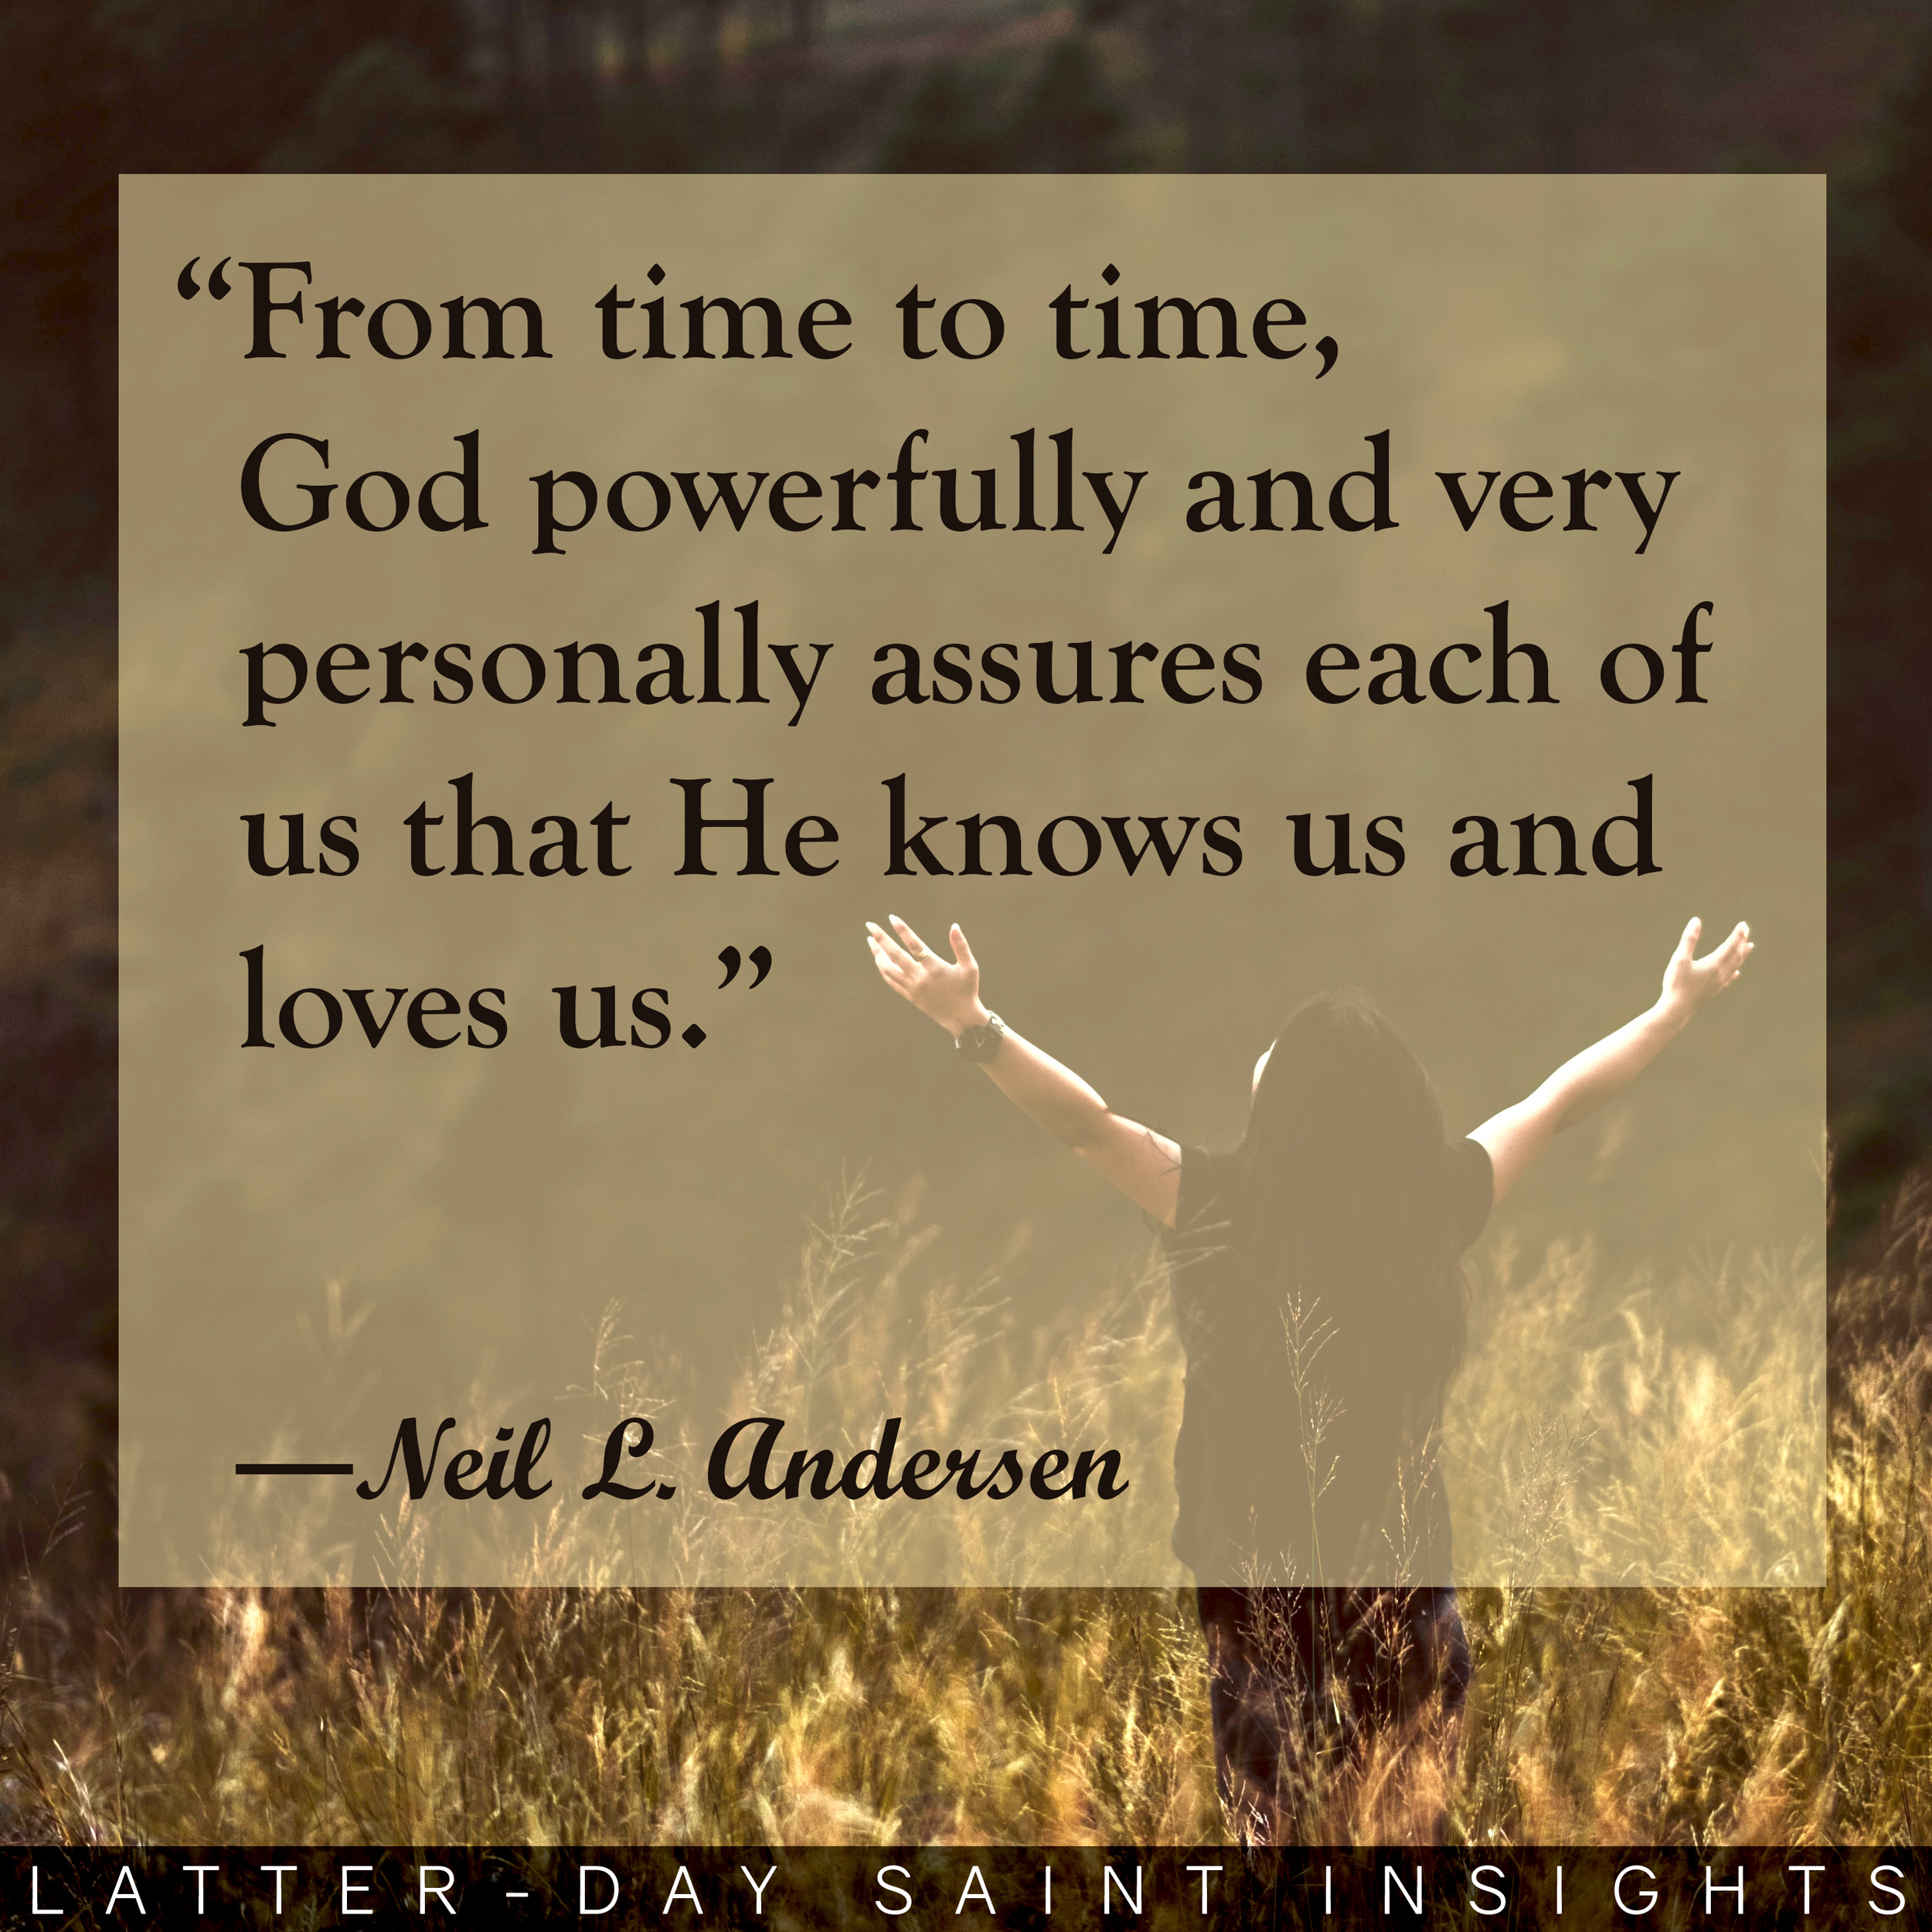 Person raising open arms while standing in field with a quote by Neil L. Anderson that says, "From time to time, God powerfully and very personally assures each of us that He knows us and loves us."